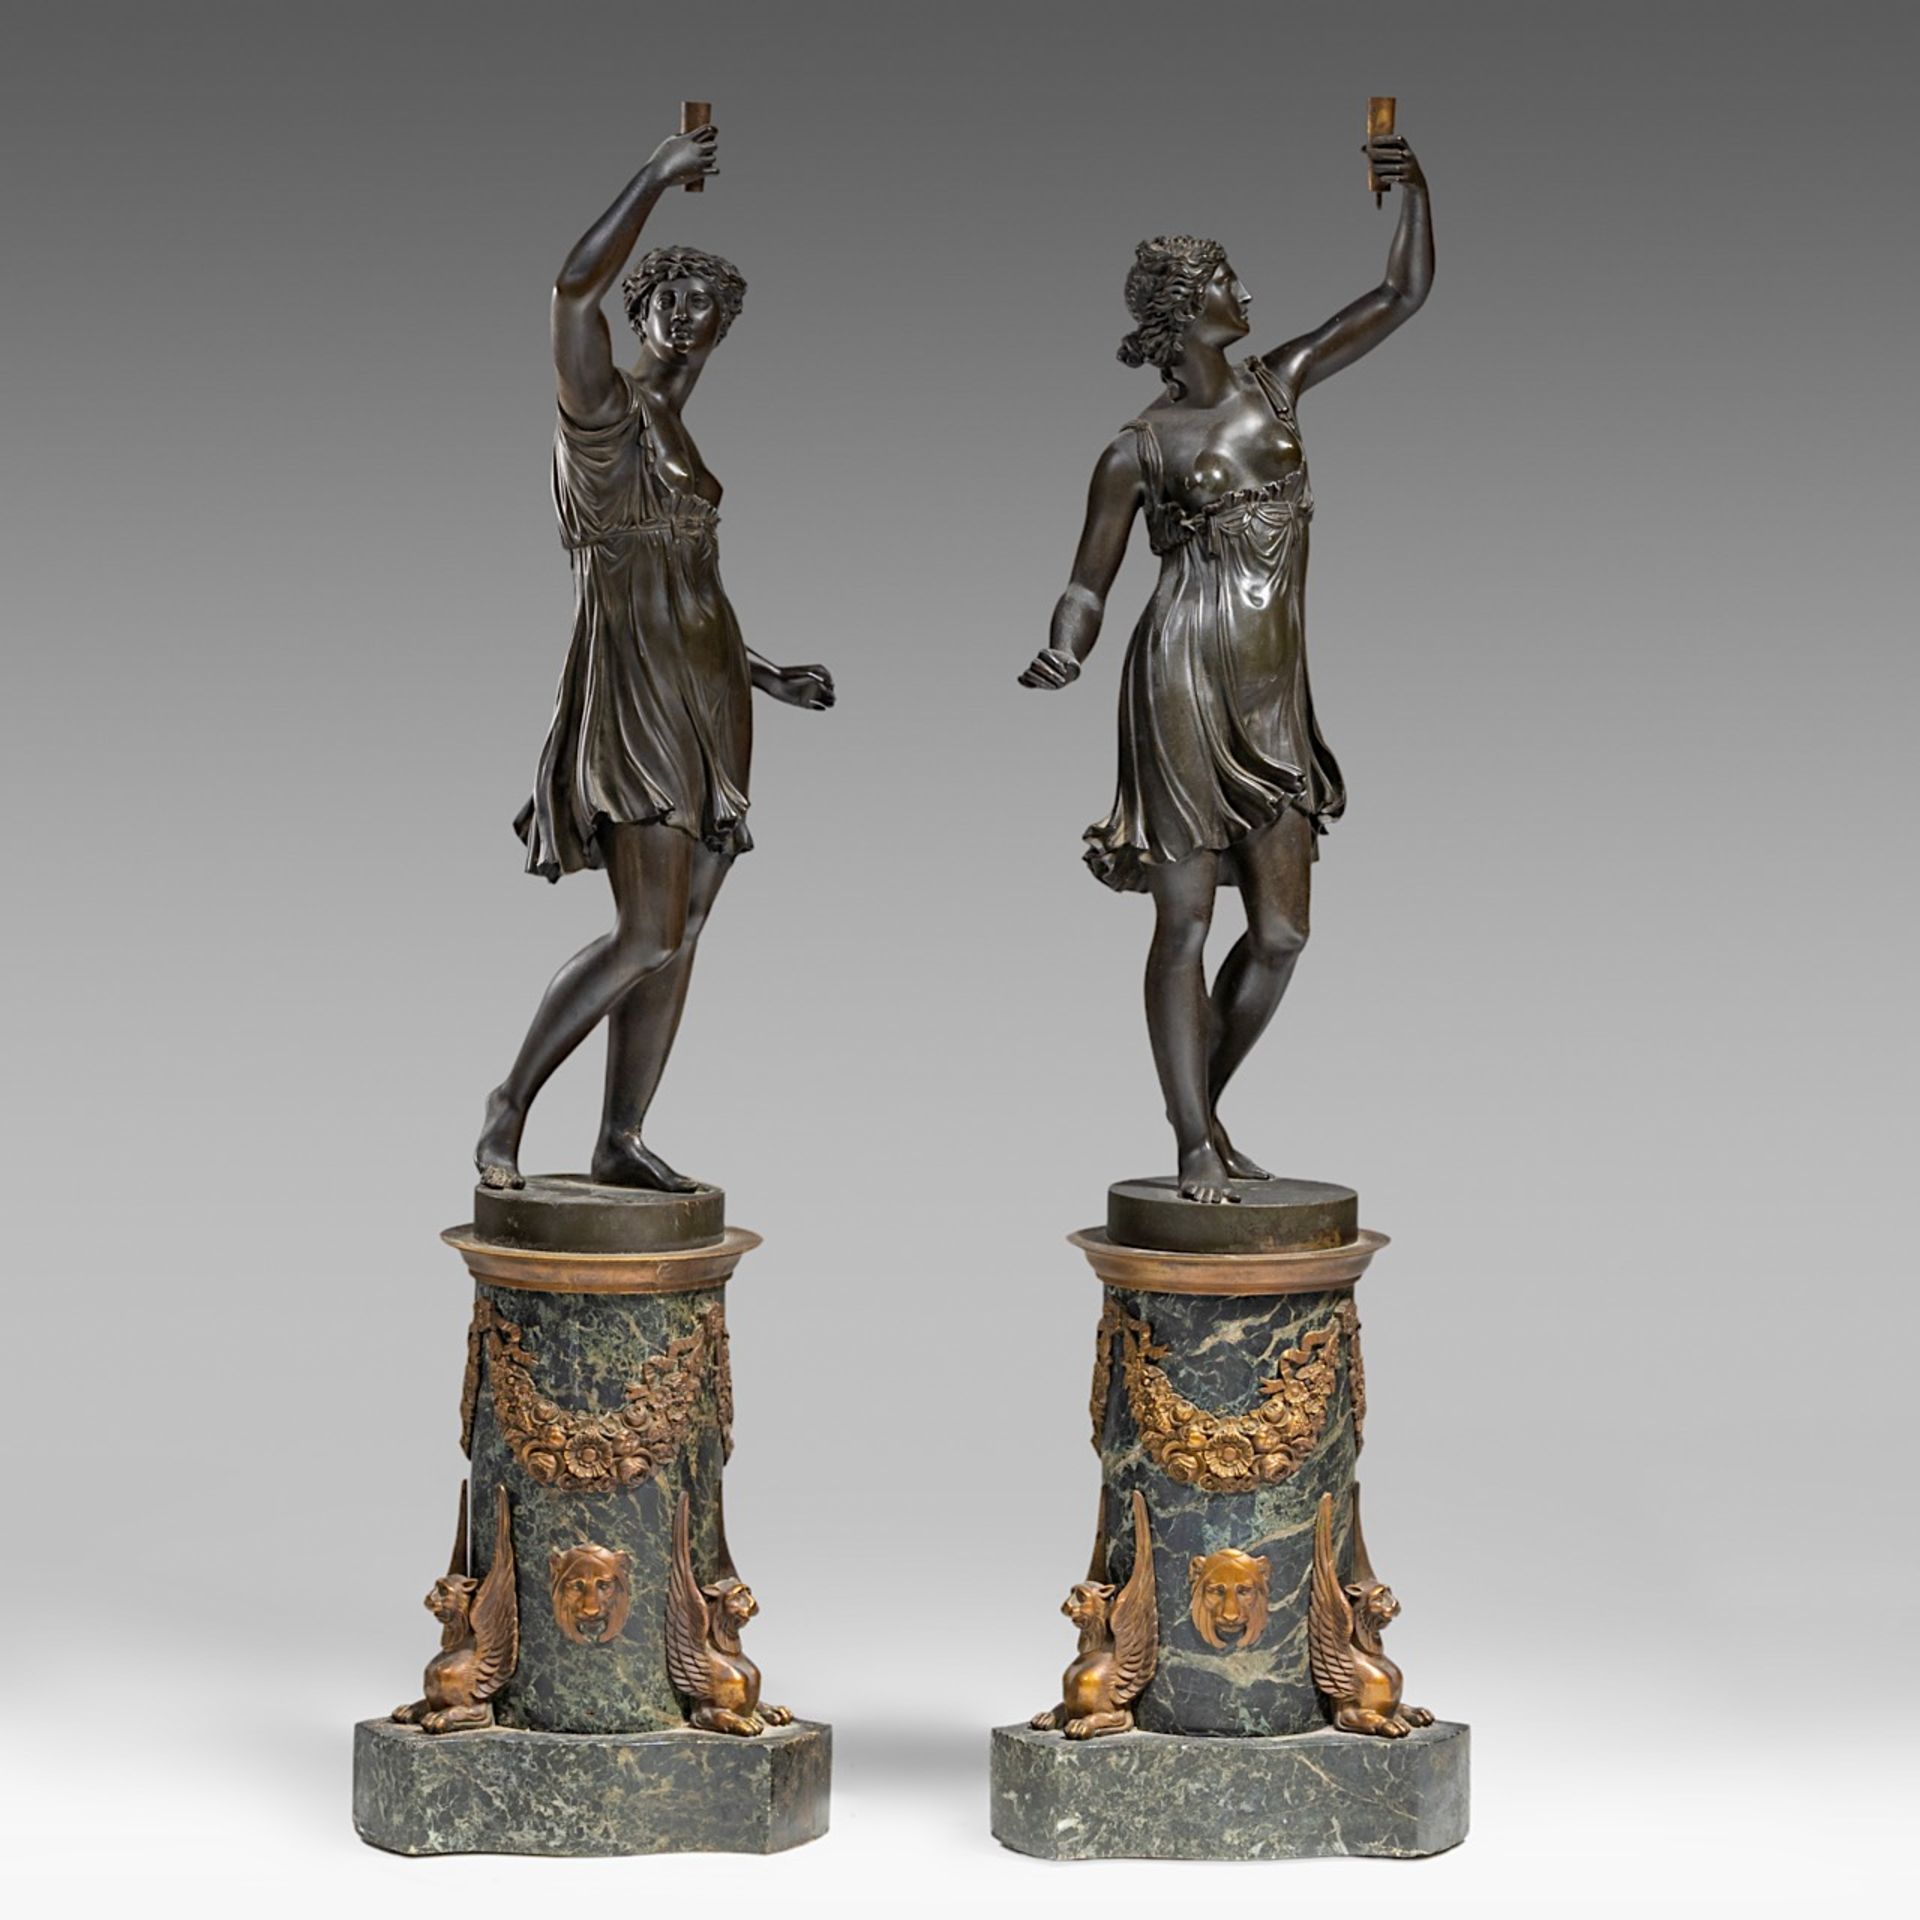 A pair of Empire style patinated bronze and vert de mer marble figural sculptures, H 86 cm